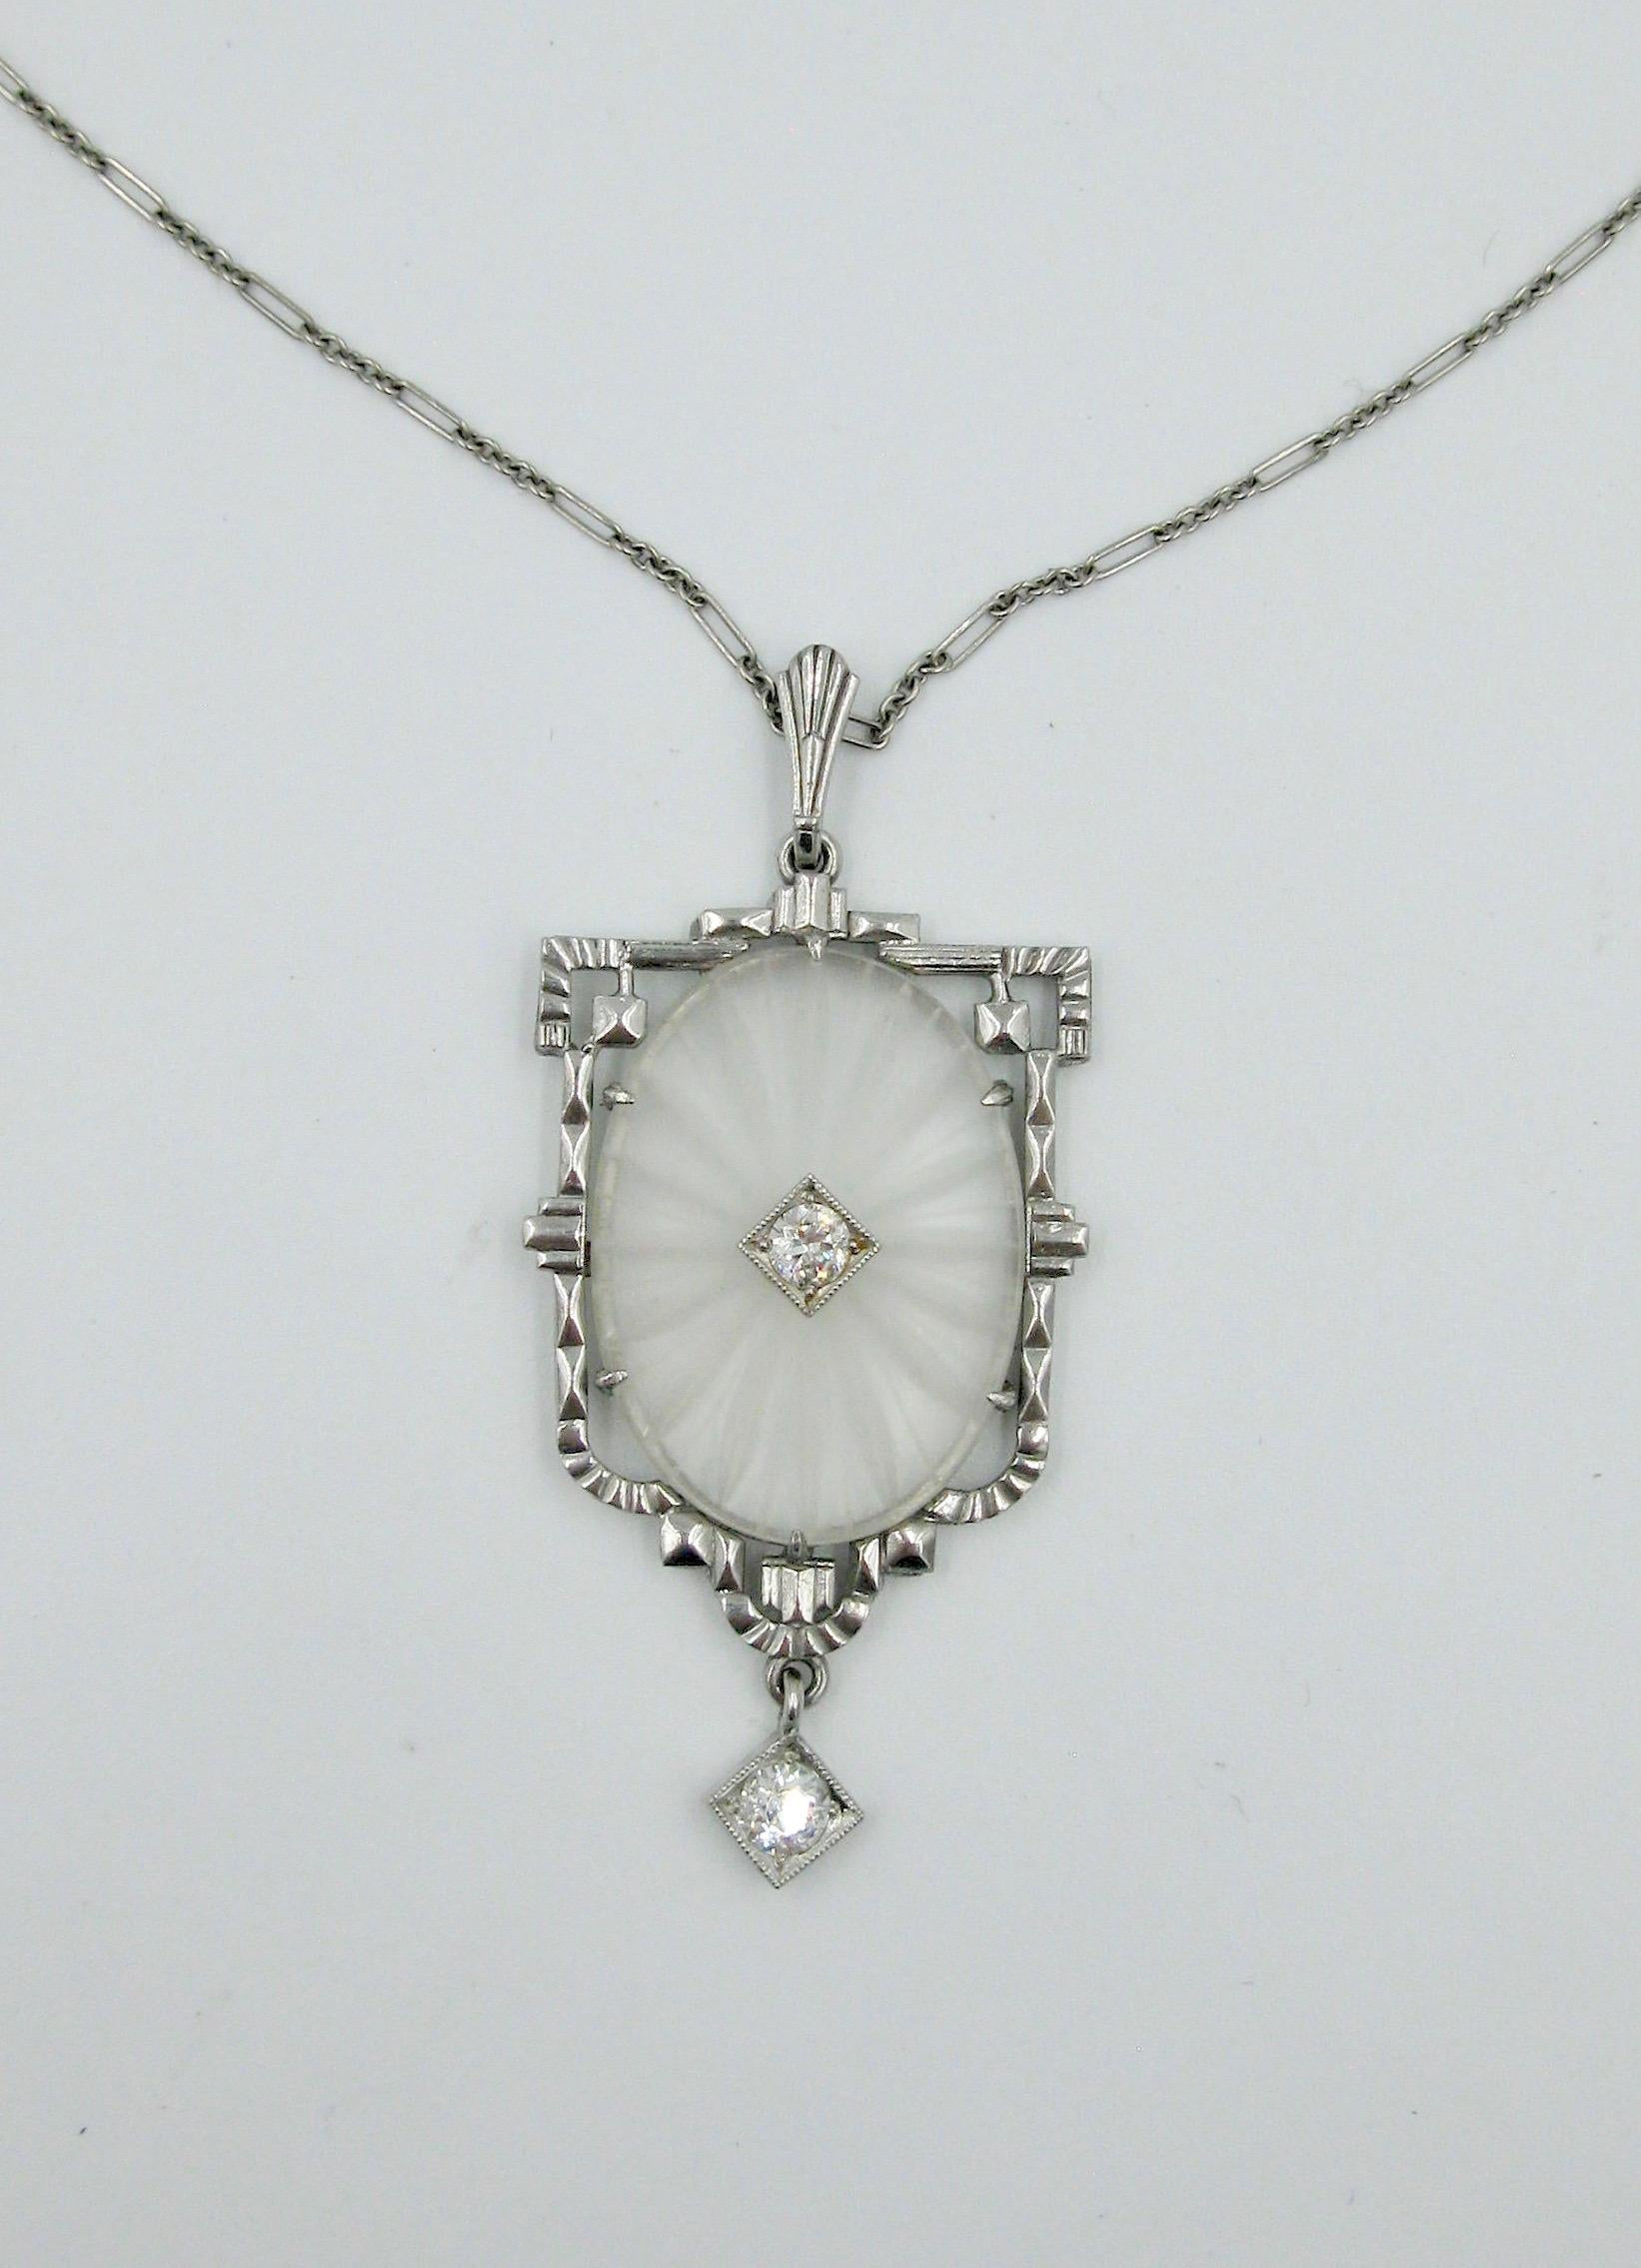 A stunning original Art Deco Pendant Necklace set with gorgeous Old European Cut Diamonds with an etched carved crystal oval center set in 14 Karat White Gold with a 14 Karat gold link chain.  A delicate romantic necklace dating to the Art Deco